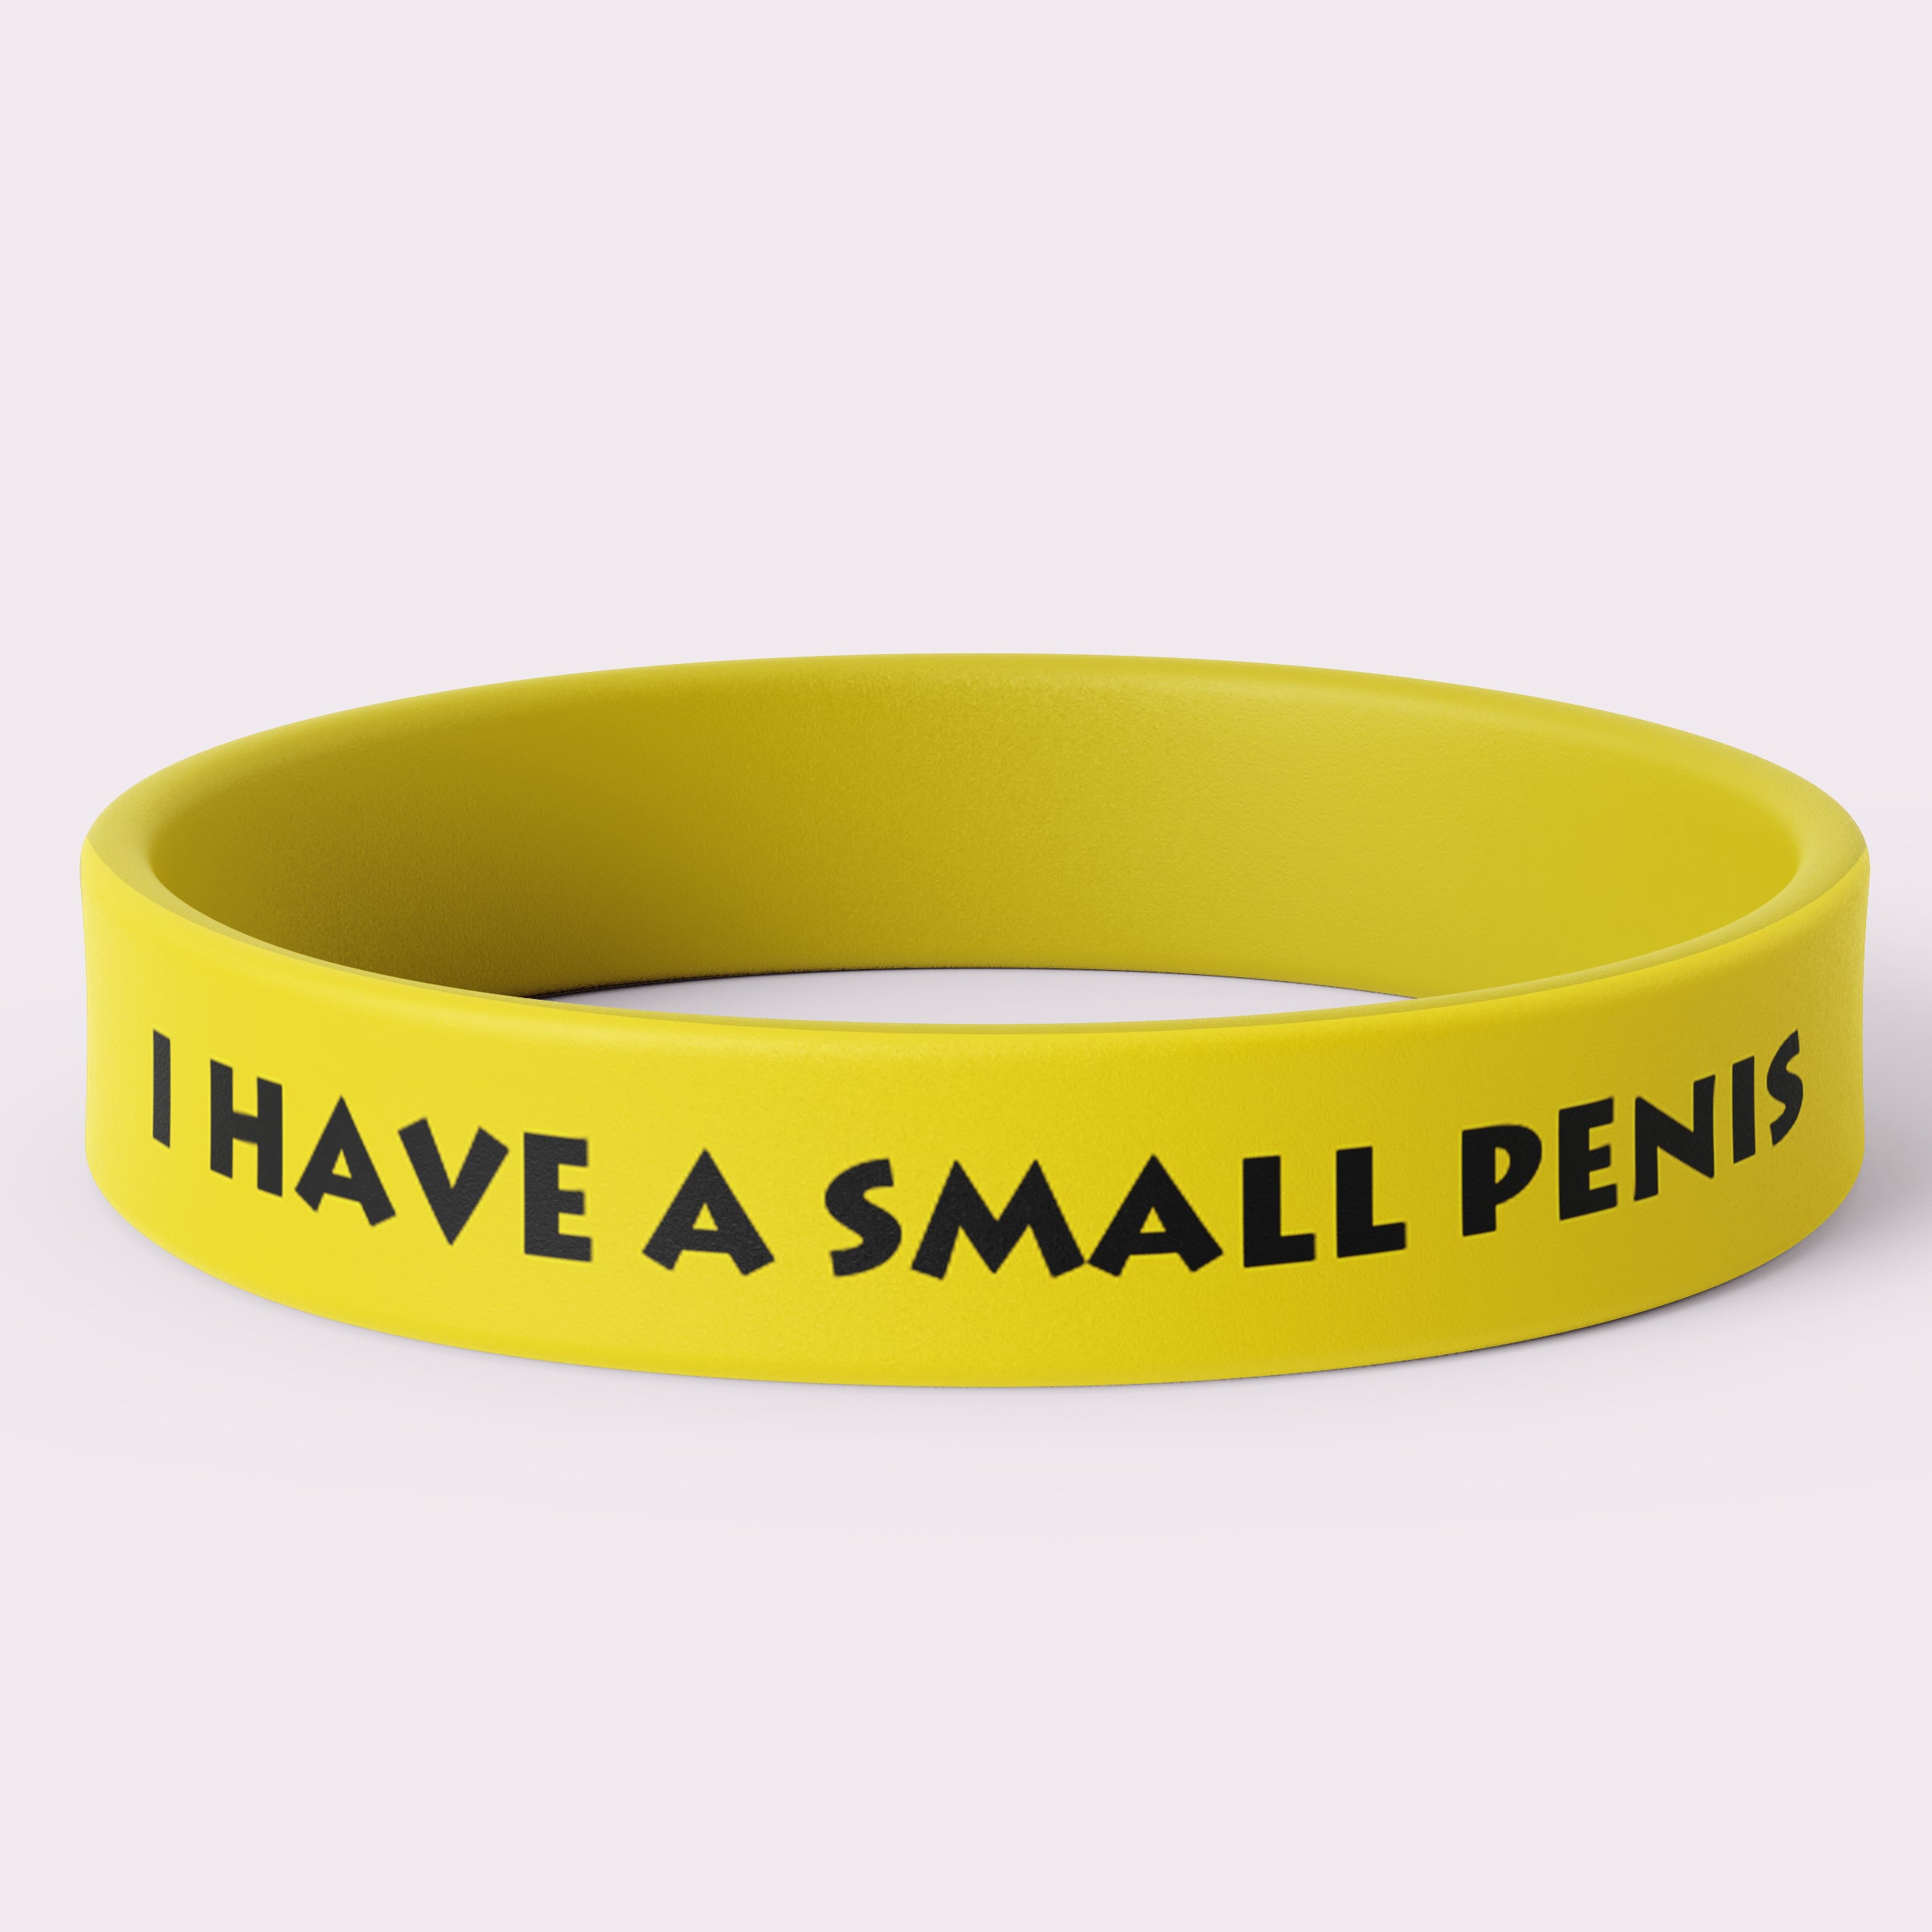 I HAVE A SMALL PENIS Prank Wristband